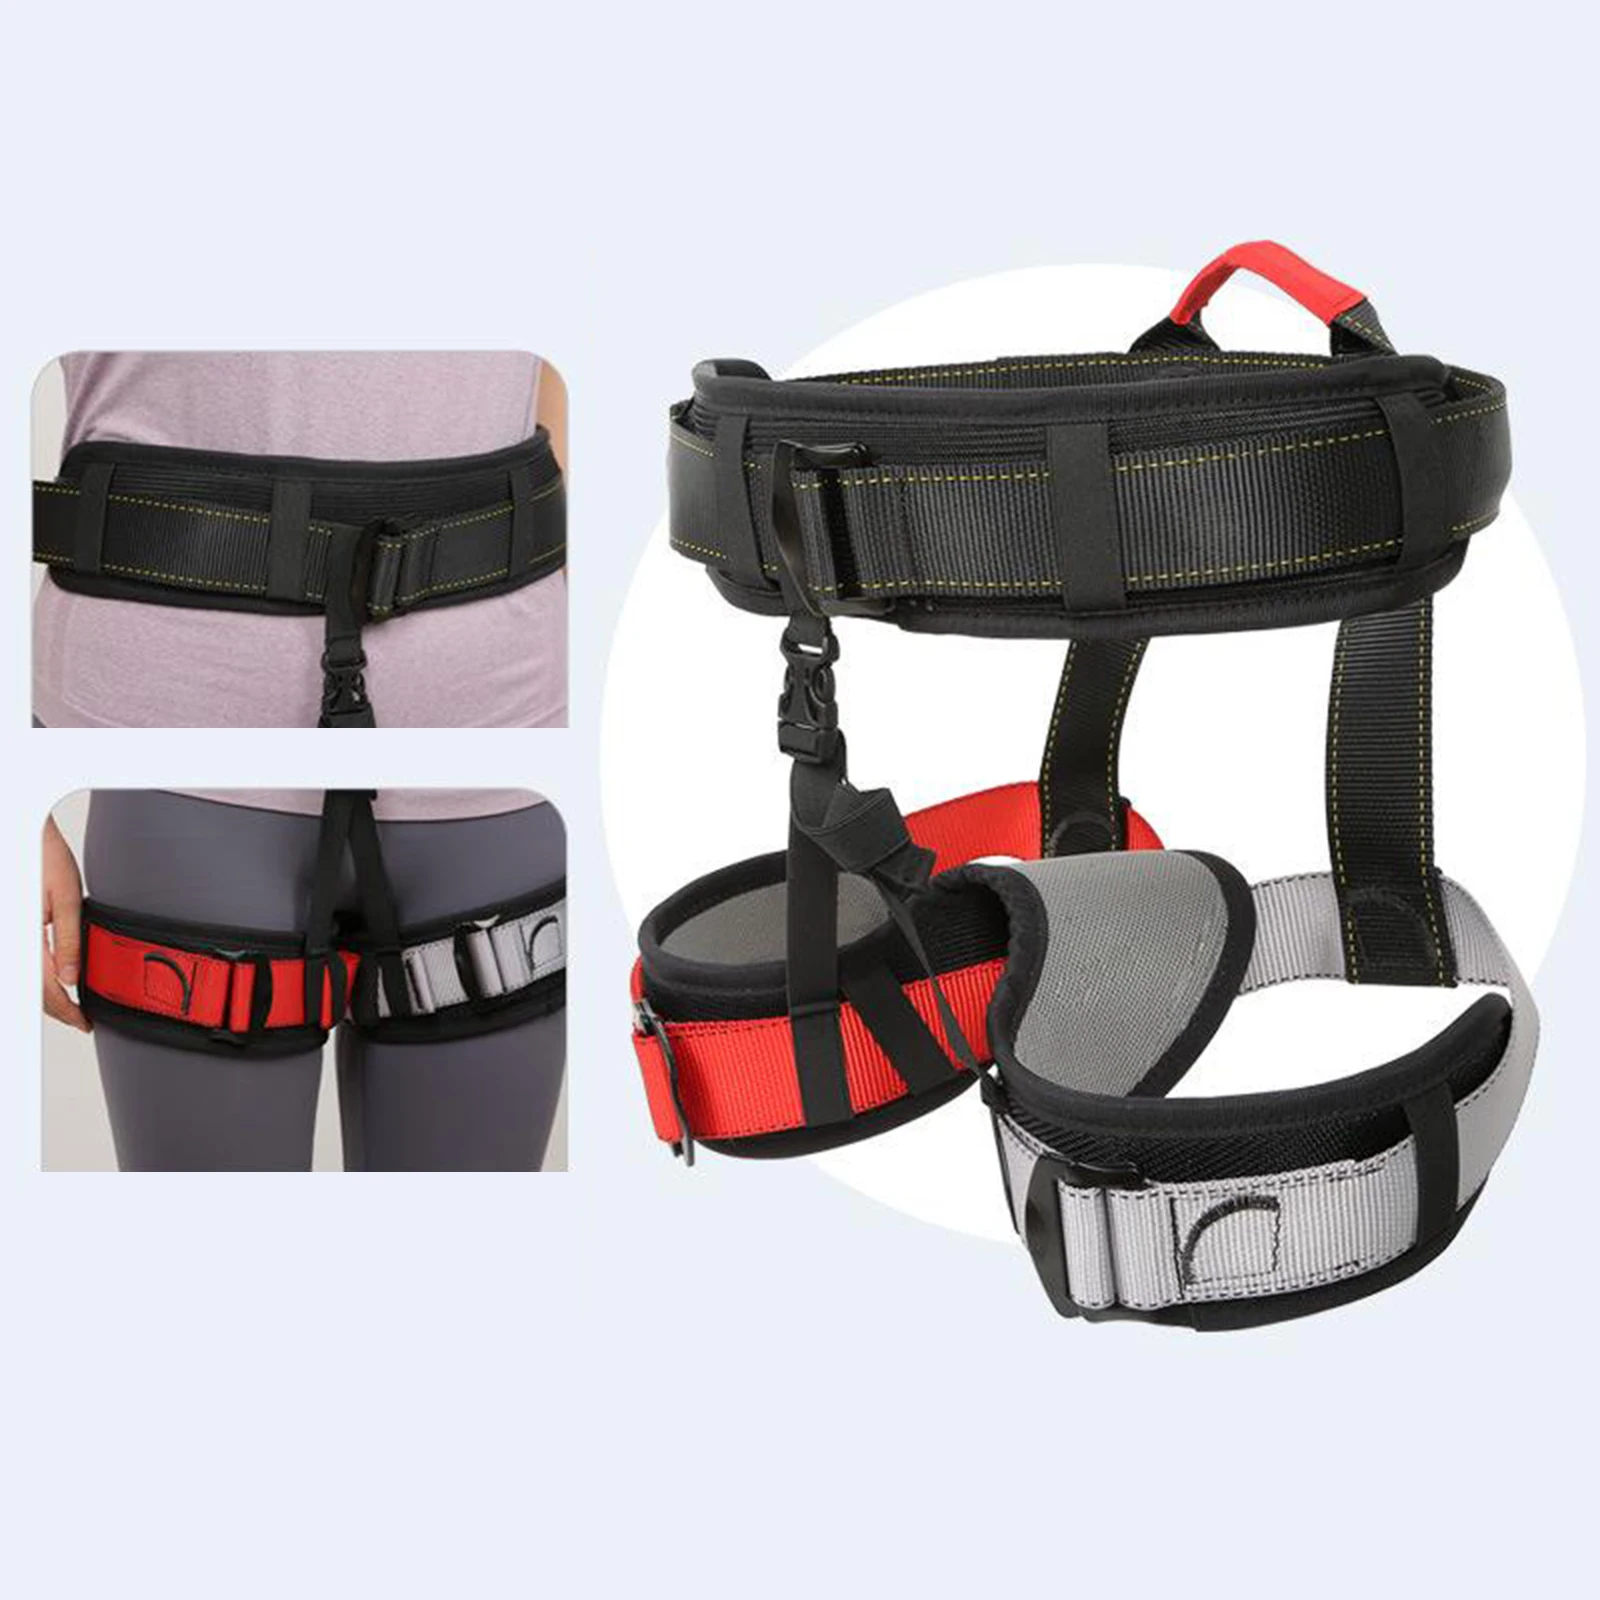 Half Body Climbing Harness Waist Safety Harnes Belts for Mountaineering Rock Climbing Rappelling Tree Climbing Strap